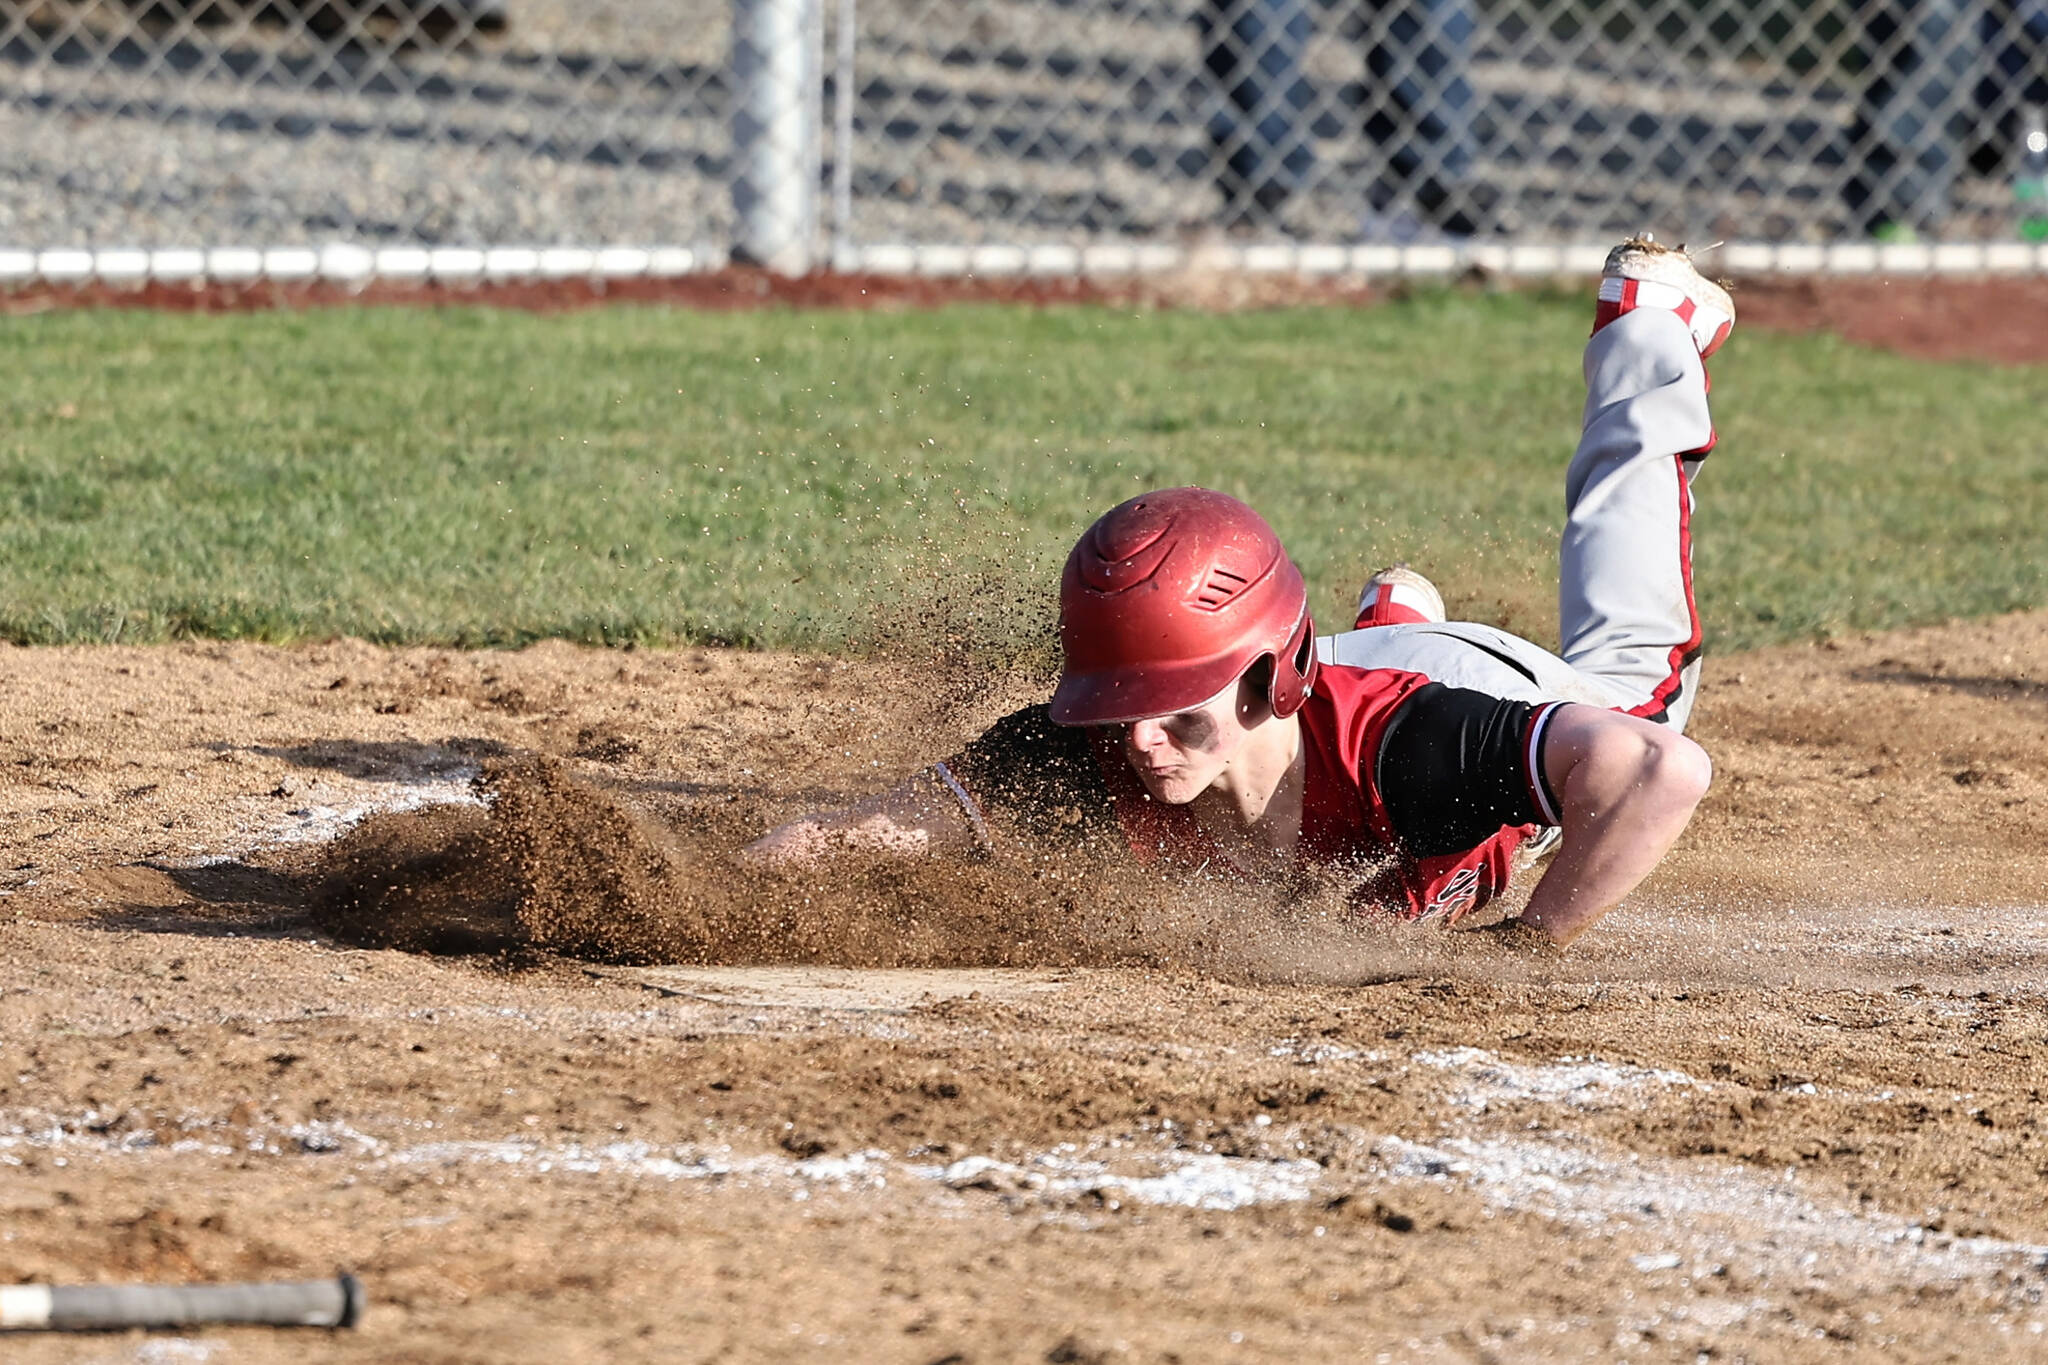 Coupeville High School freshman Aiden O’Neill, slides into a base during a game against South Whidbey High School March 15. Coupeville beat South Whidbey 13-2 in the baseball season opener.